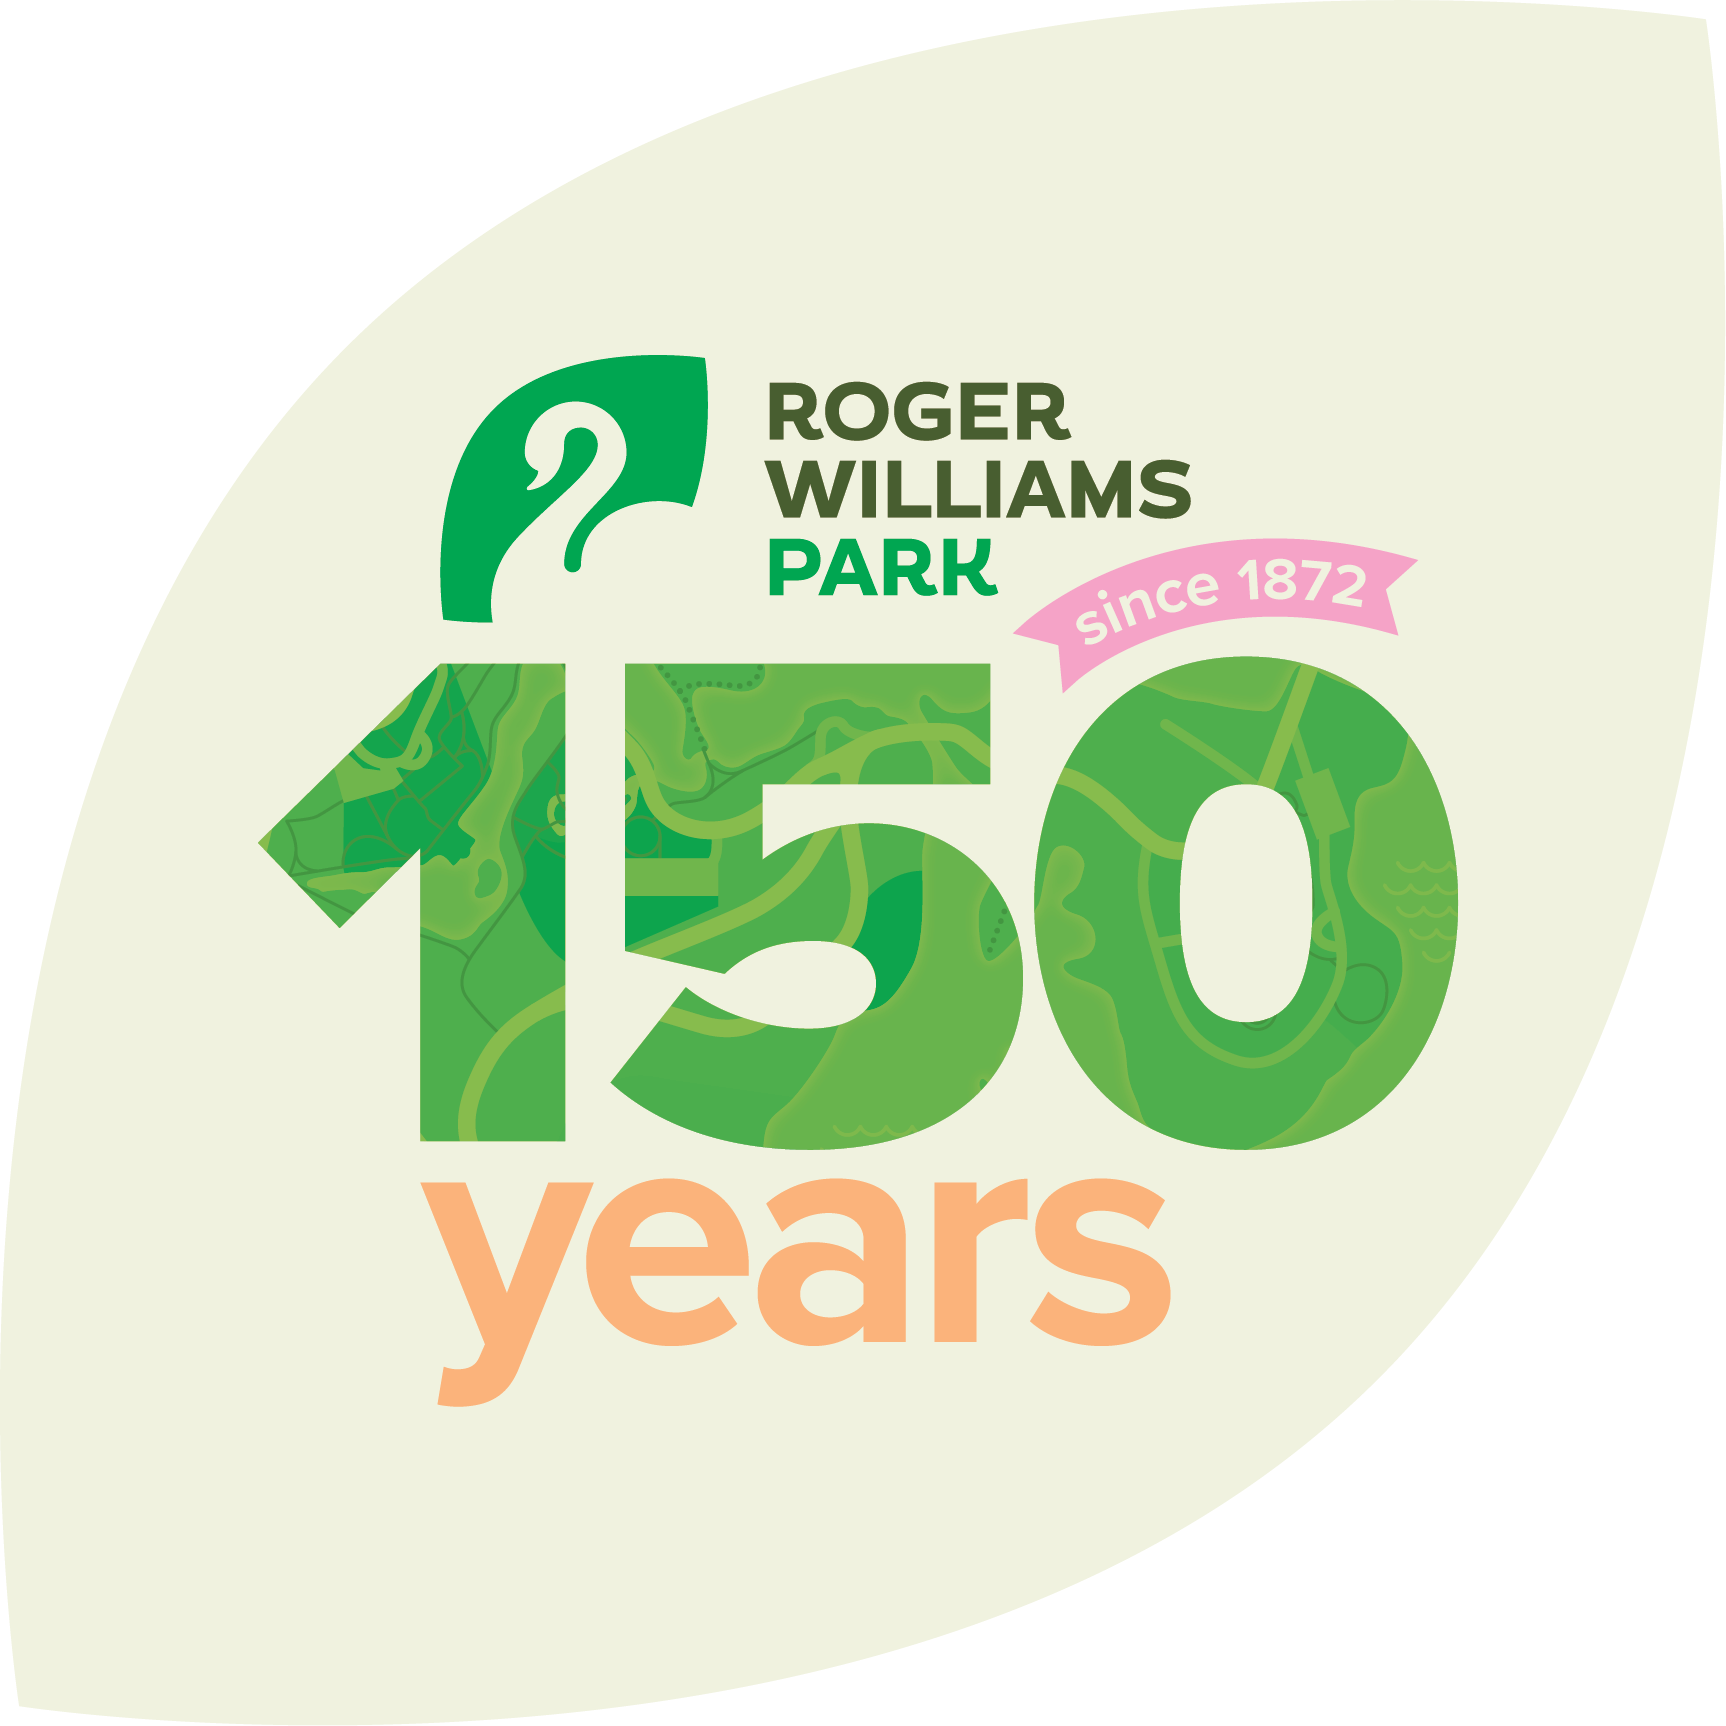 Inside of a light green leaf shape reads Roger Williams Park 150 years since 1872